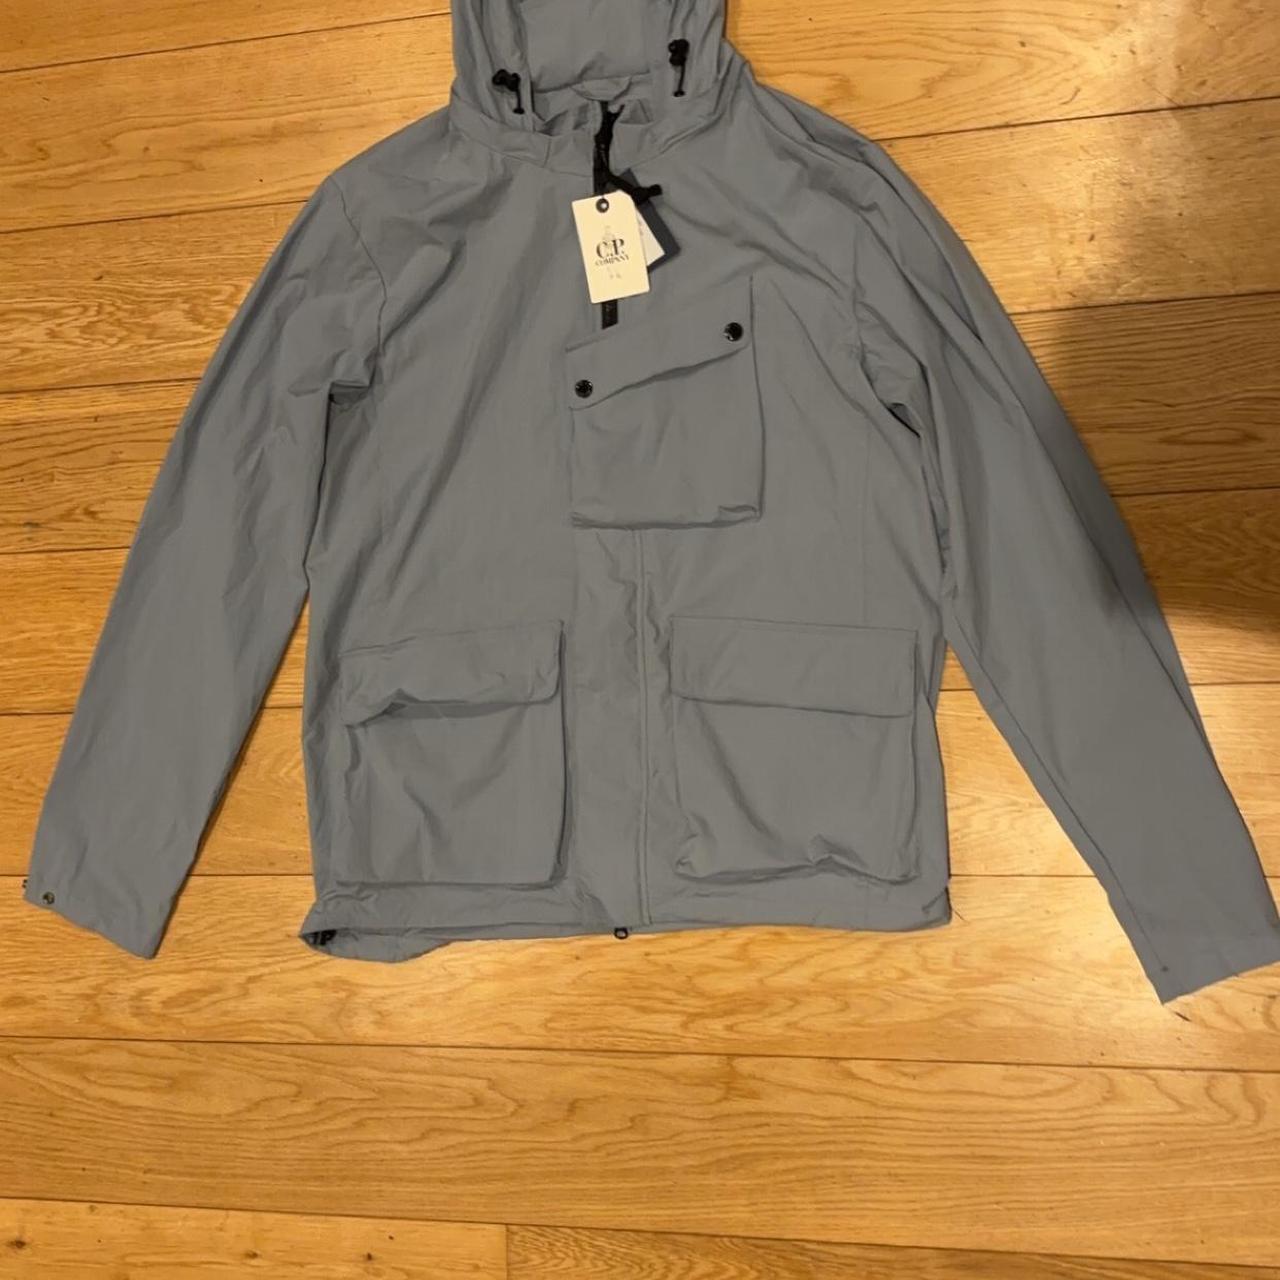 Cp grey coat Brand new with tags Never worn... - Depop